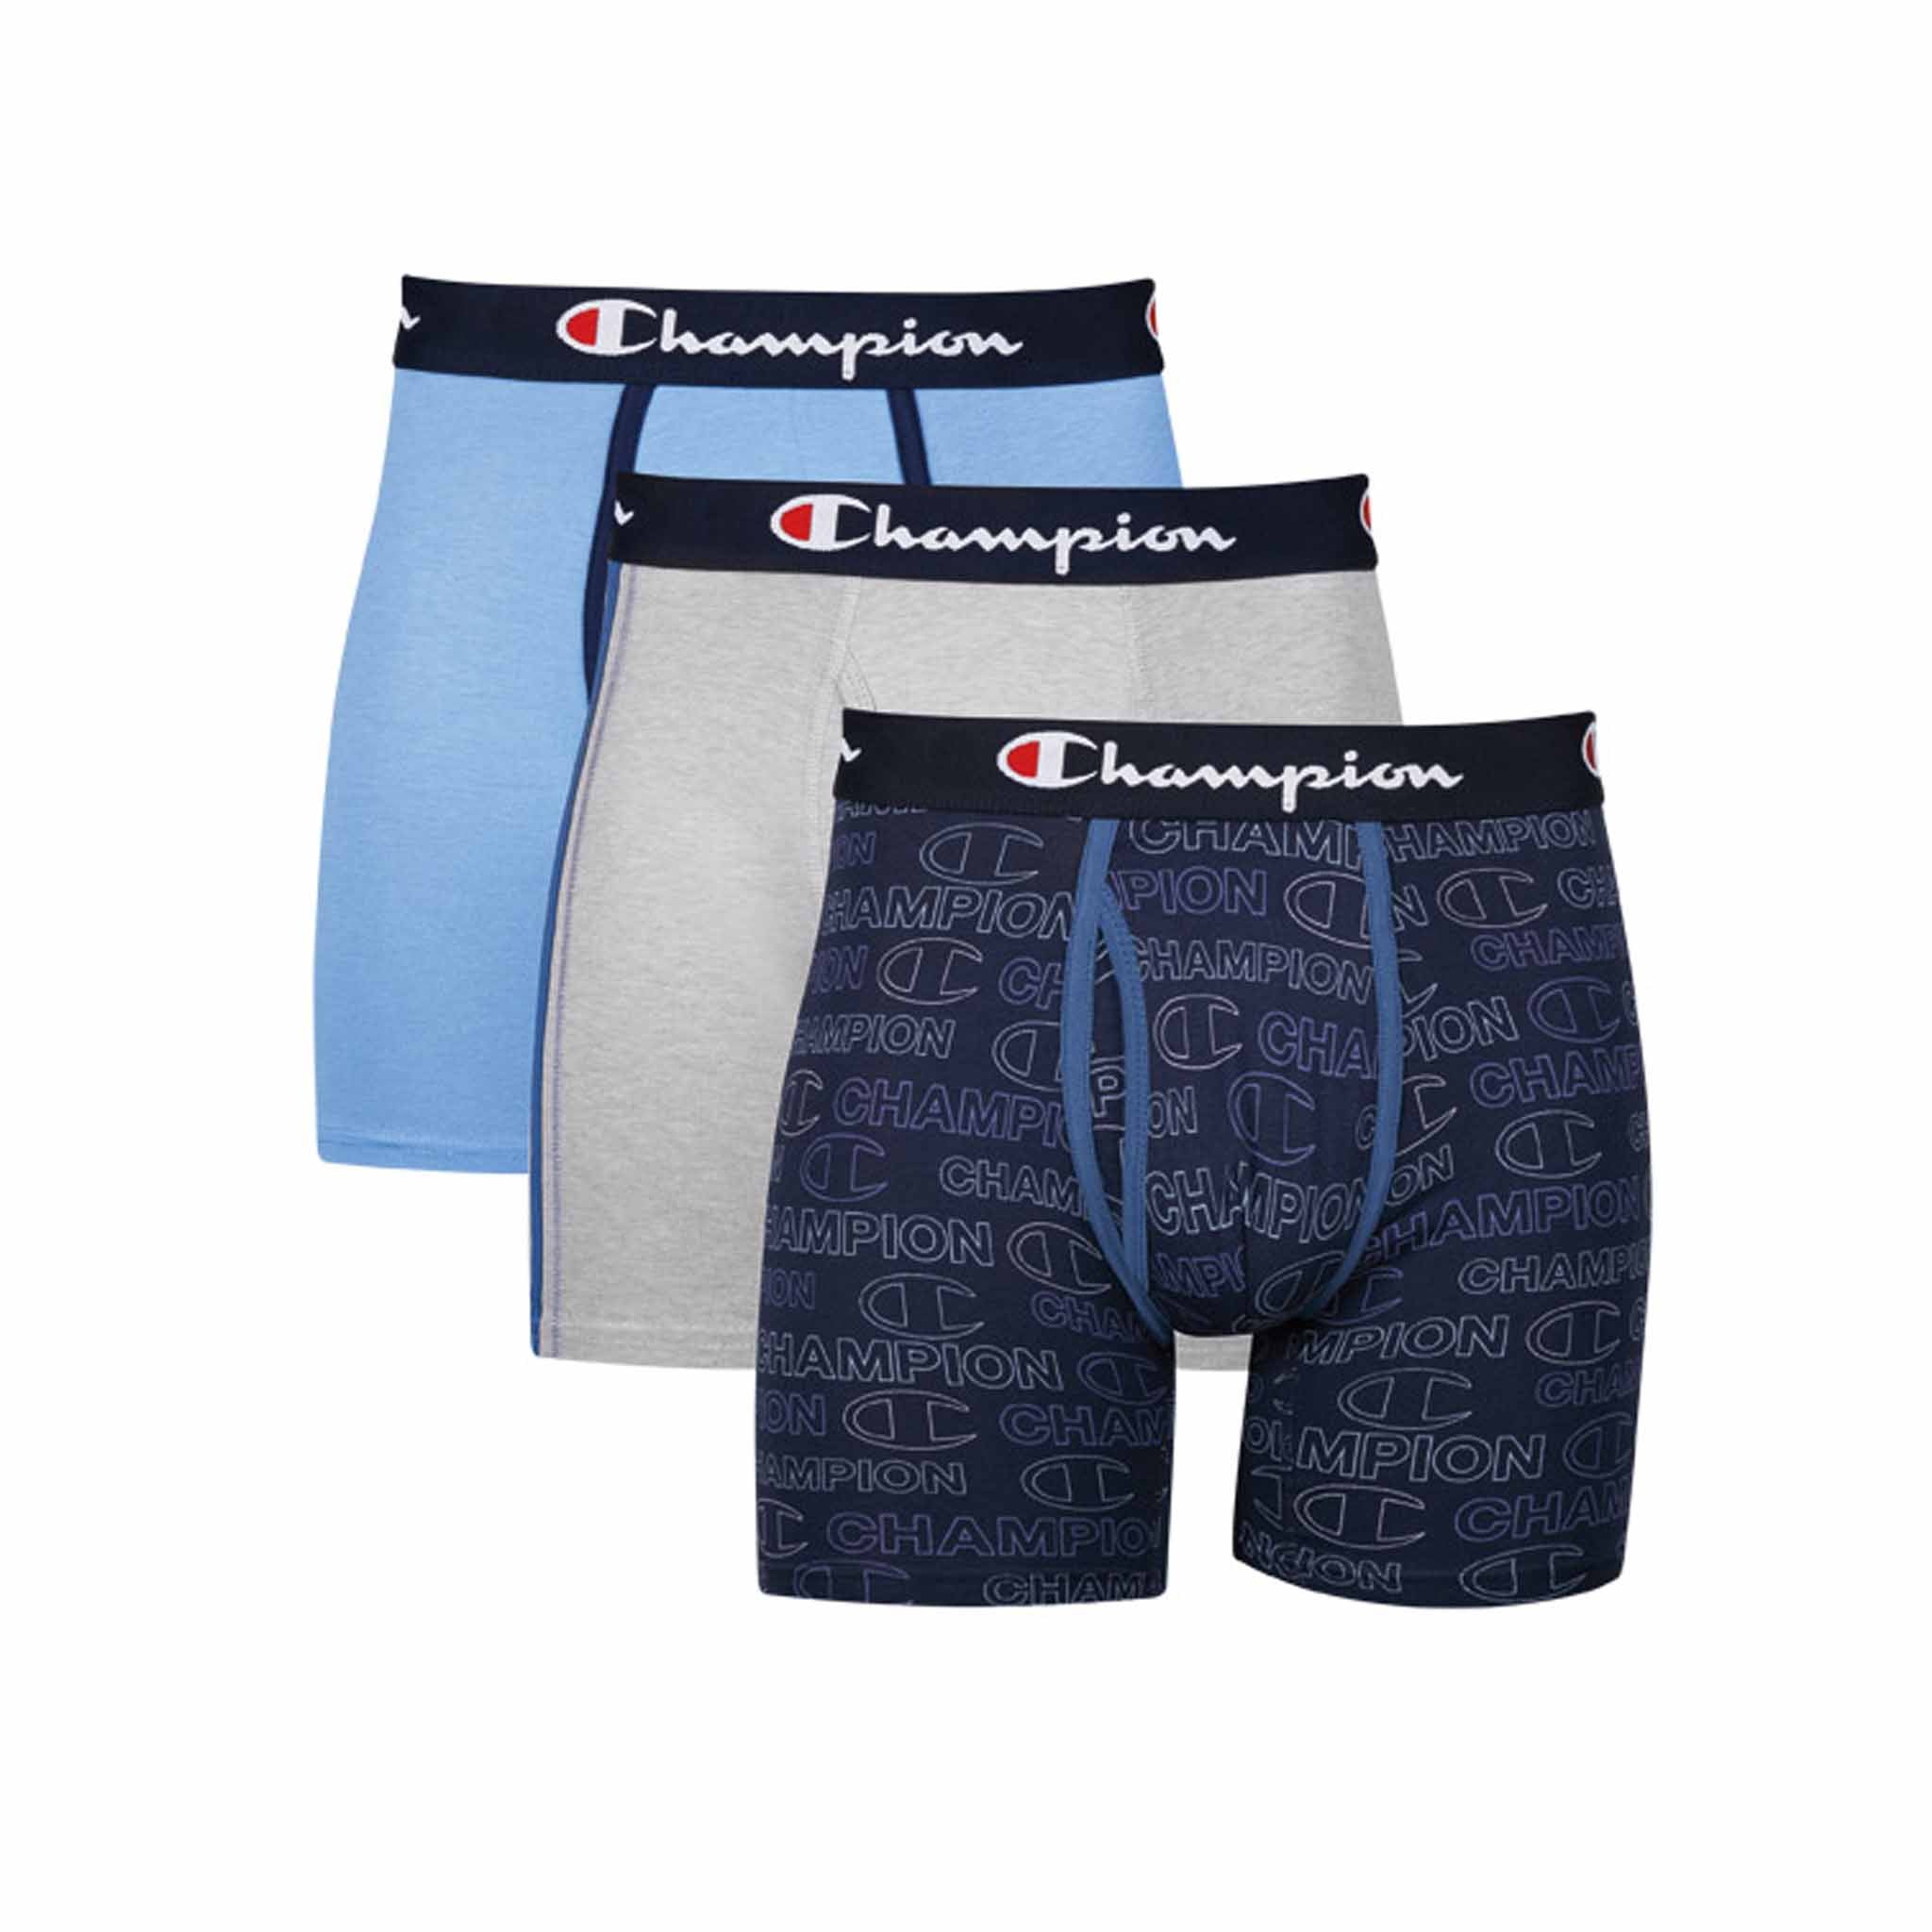 Men's Performance Boxer Briefs Pack, Moisture-Wicking, Anti-Odor, Polyester  Spandex, 3-Pack, Navy/Teal/Red